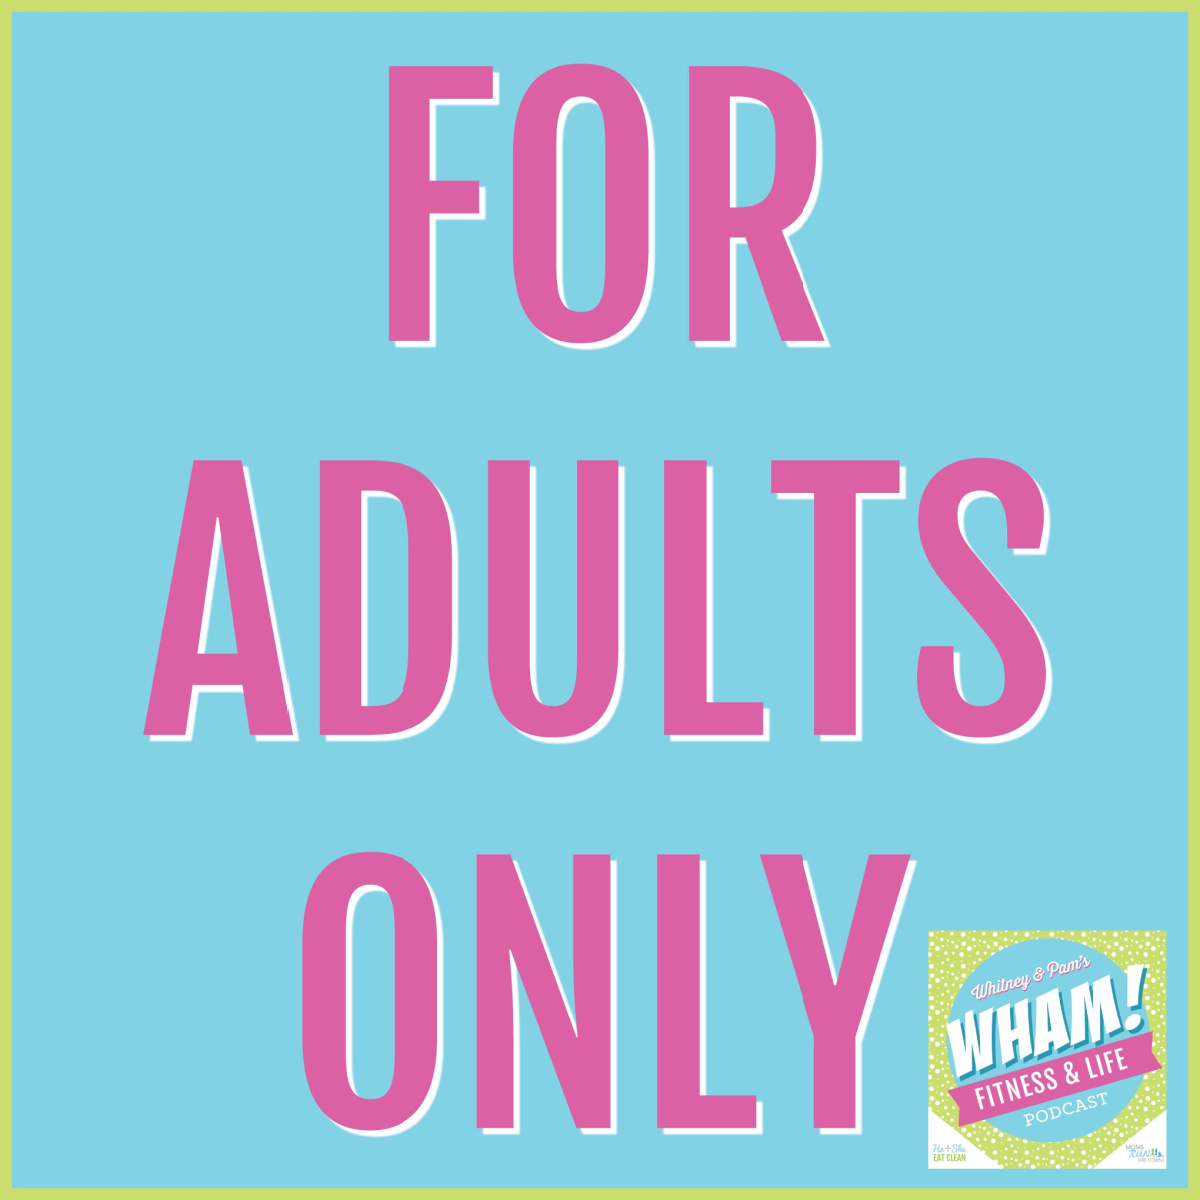 text reads For Adults Only - WHAM Podcast